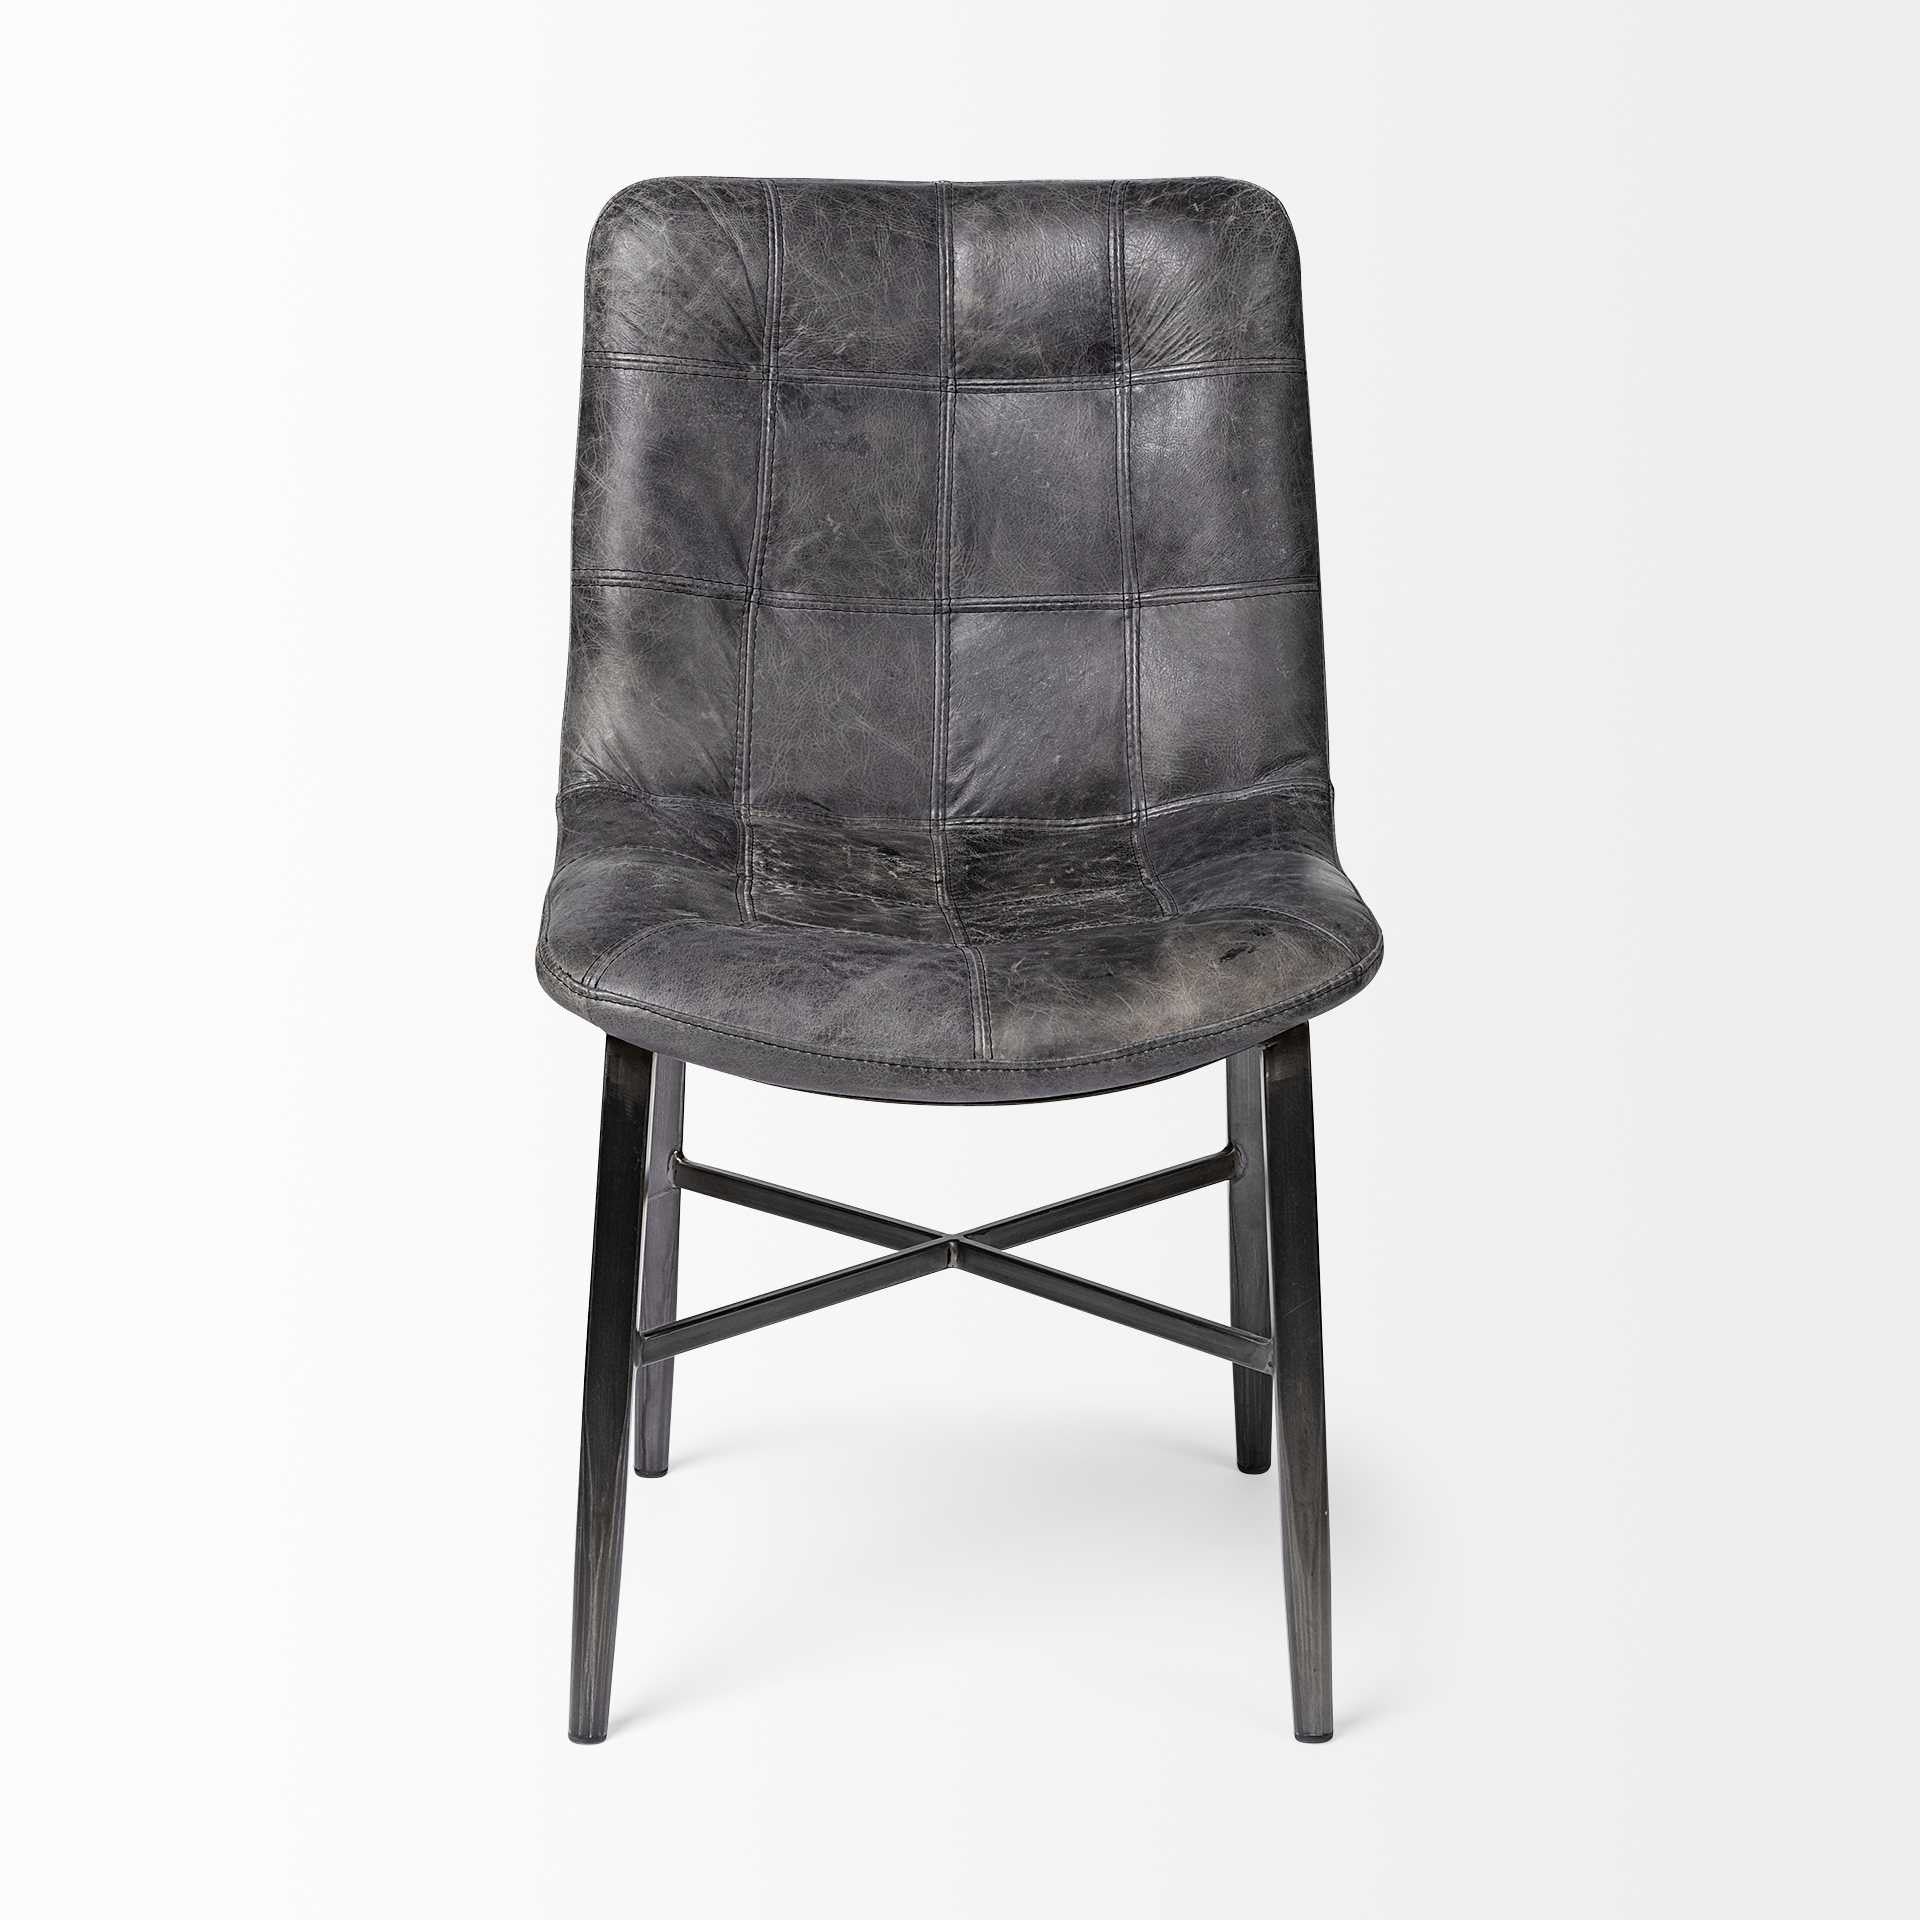 Black Leather Seat With Black Metal Frame Dining Chair